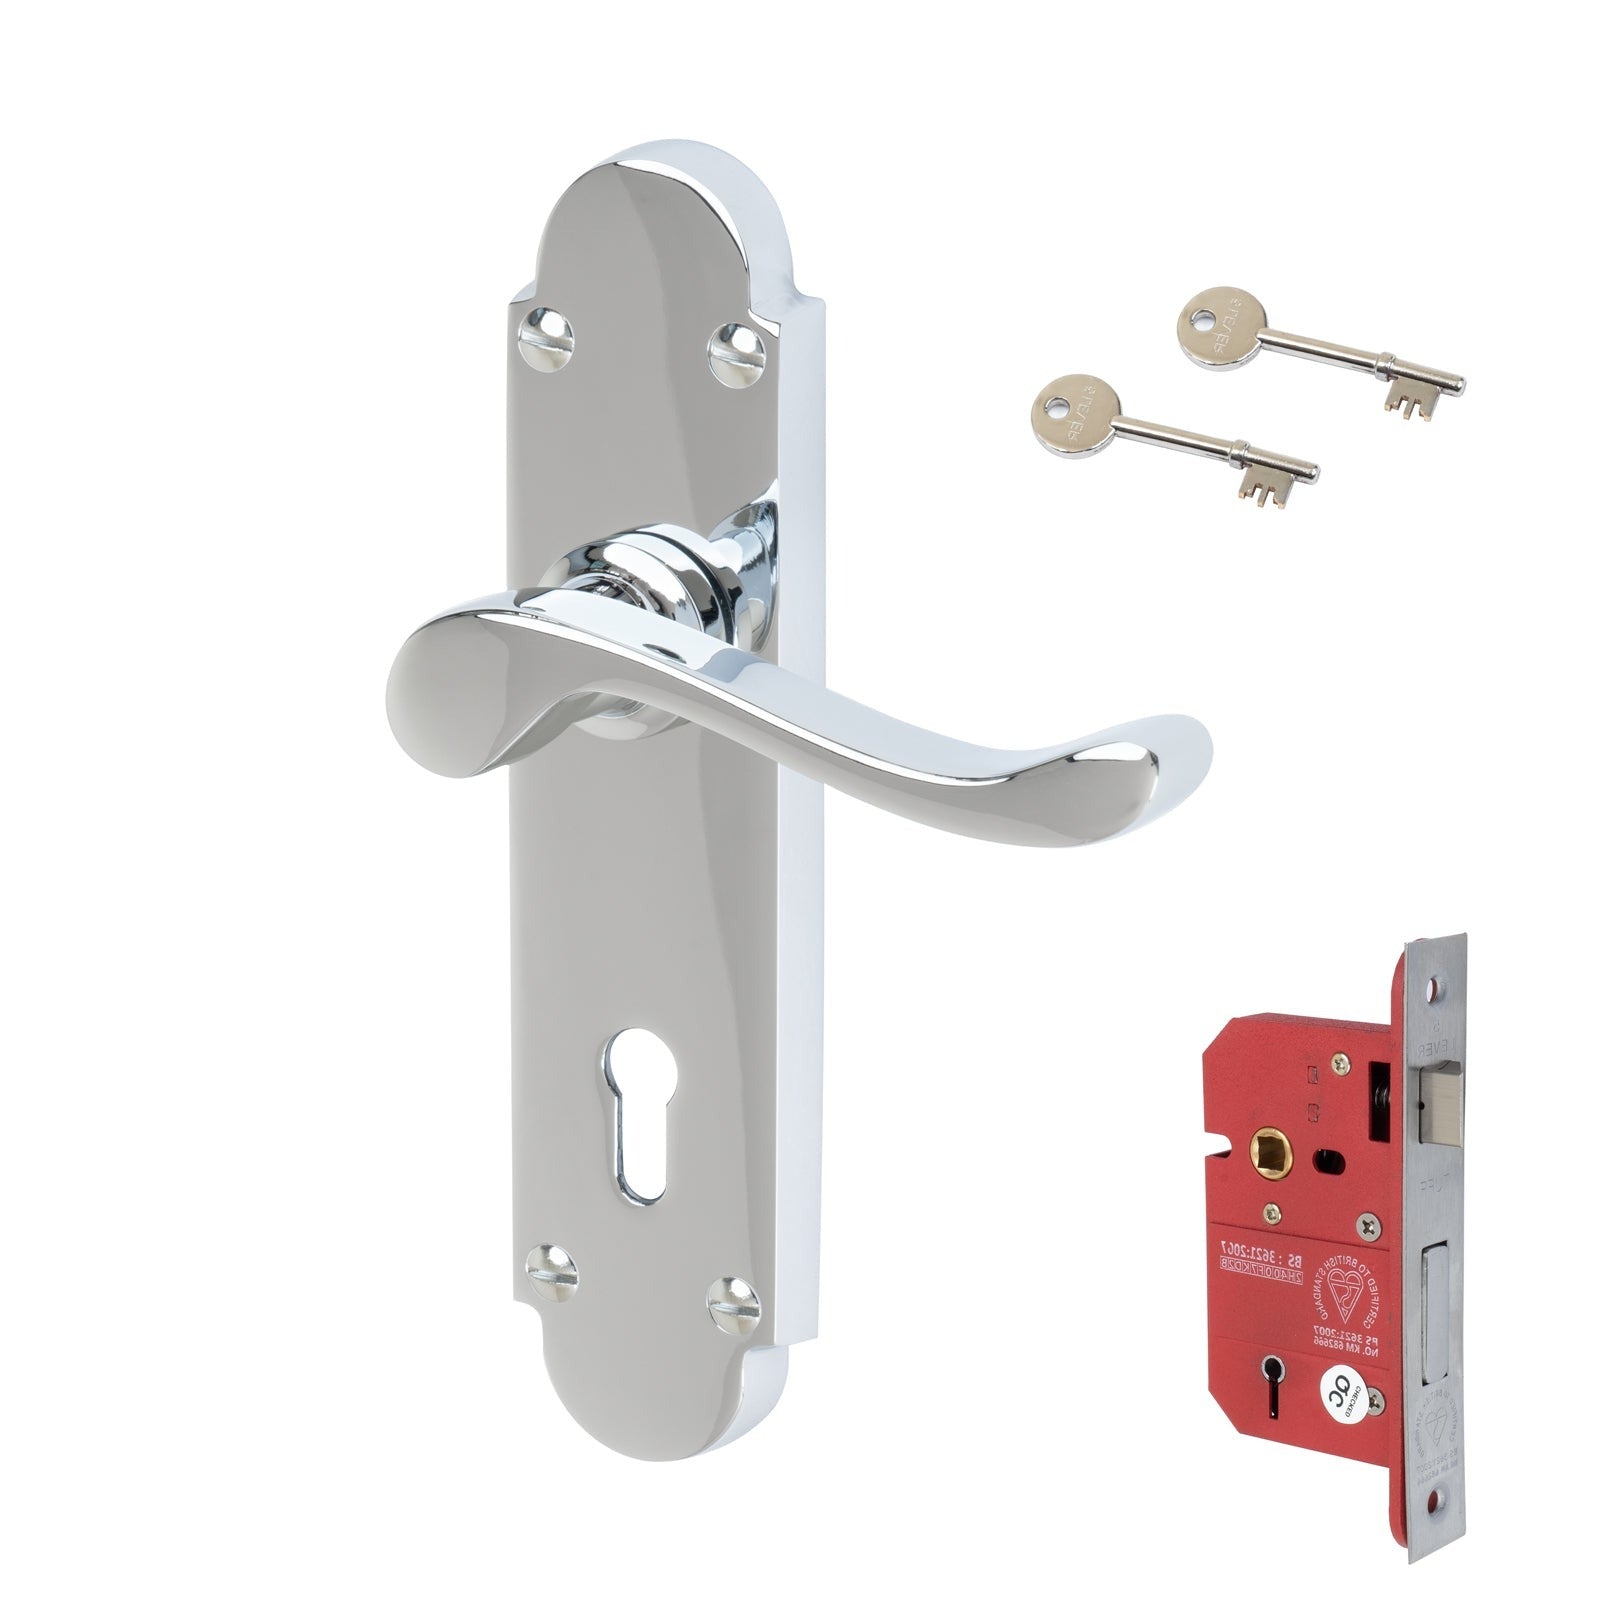 Savoy Door Handles On Plate 5 Lever Lock Handle Set in Polished Chrome 